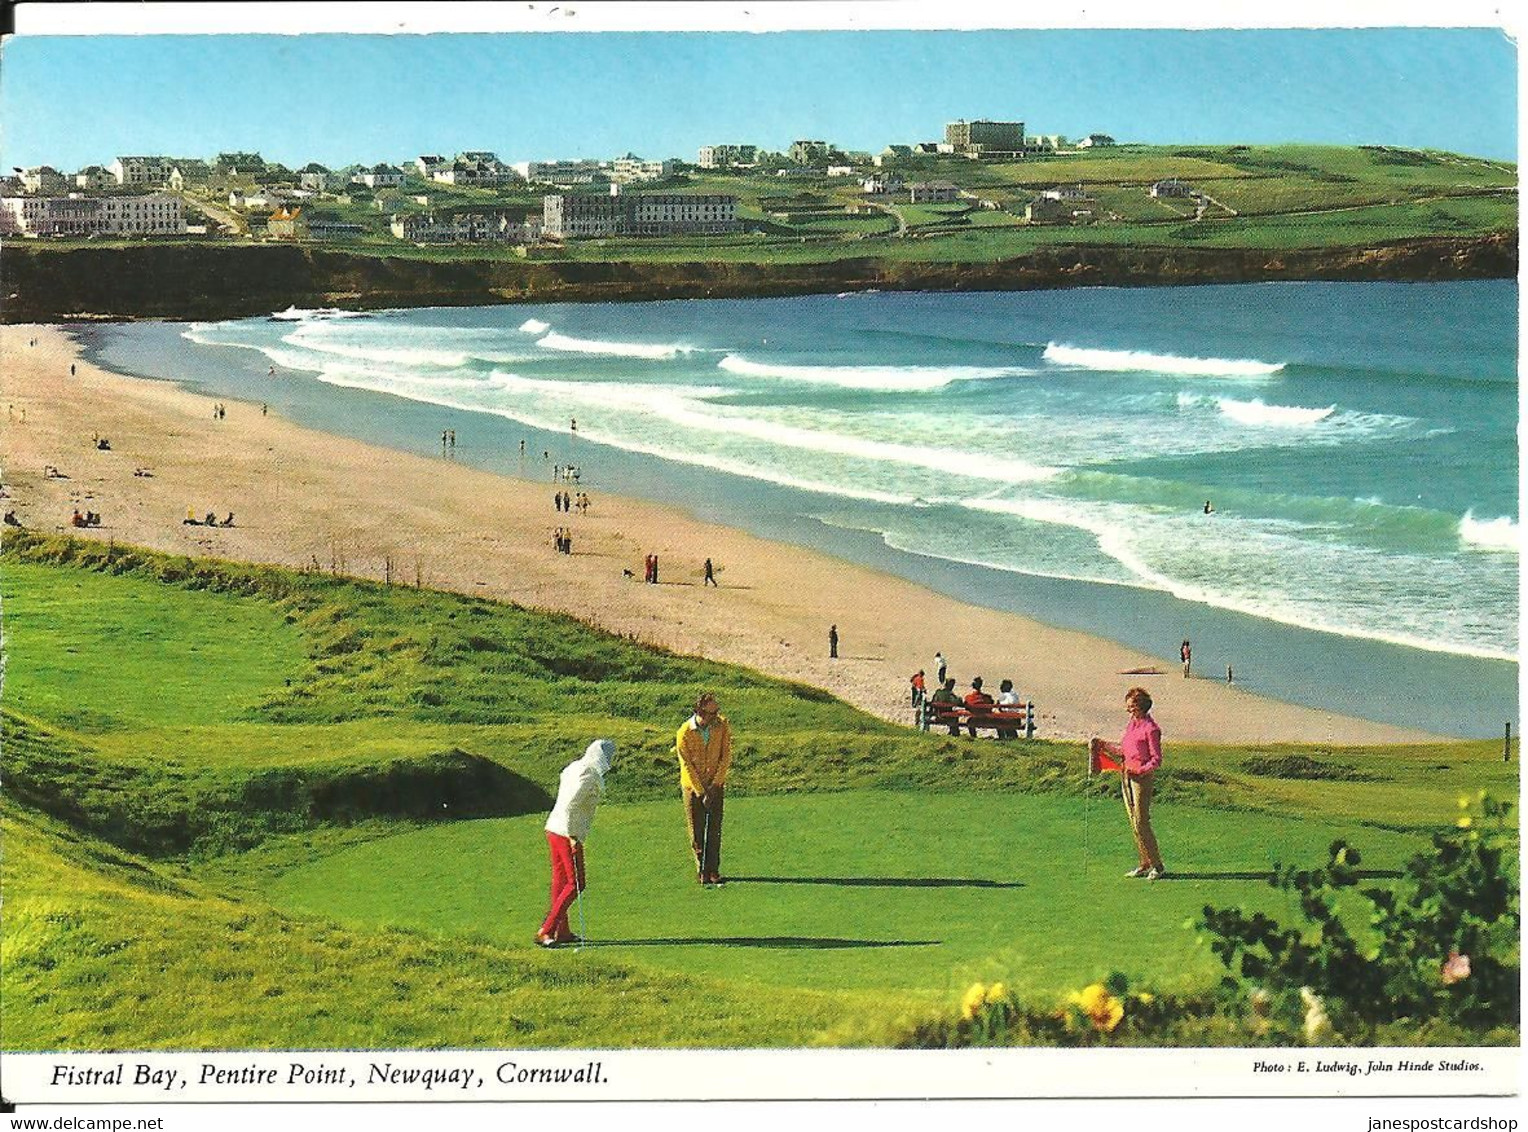 LARGER SIZED COLOURED POSTCARD - FISTRAL BAY - PENTIRE POINT - NEWQUAY - CORNWALL - GOLF - Newquay